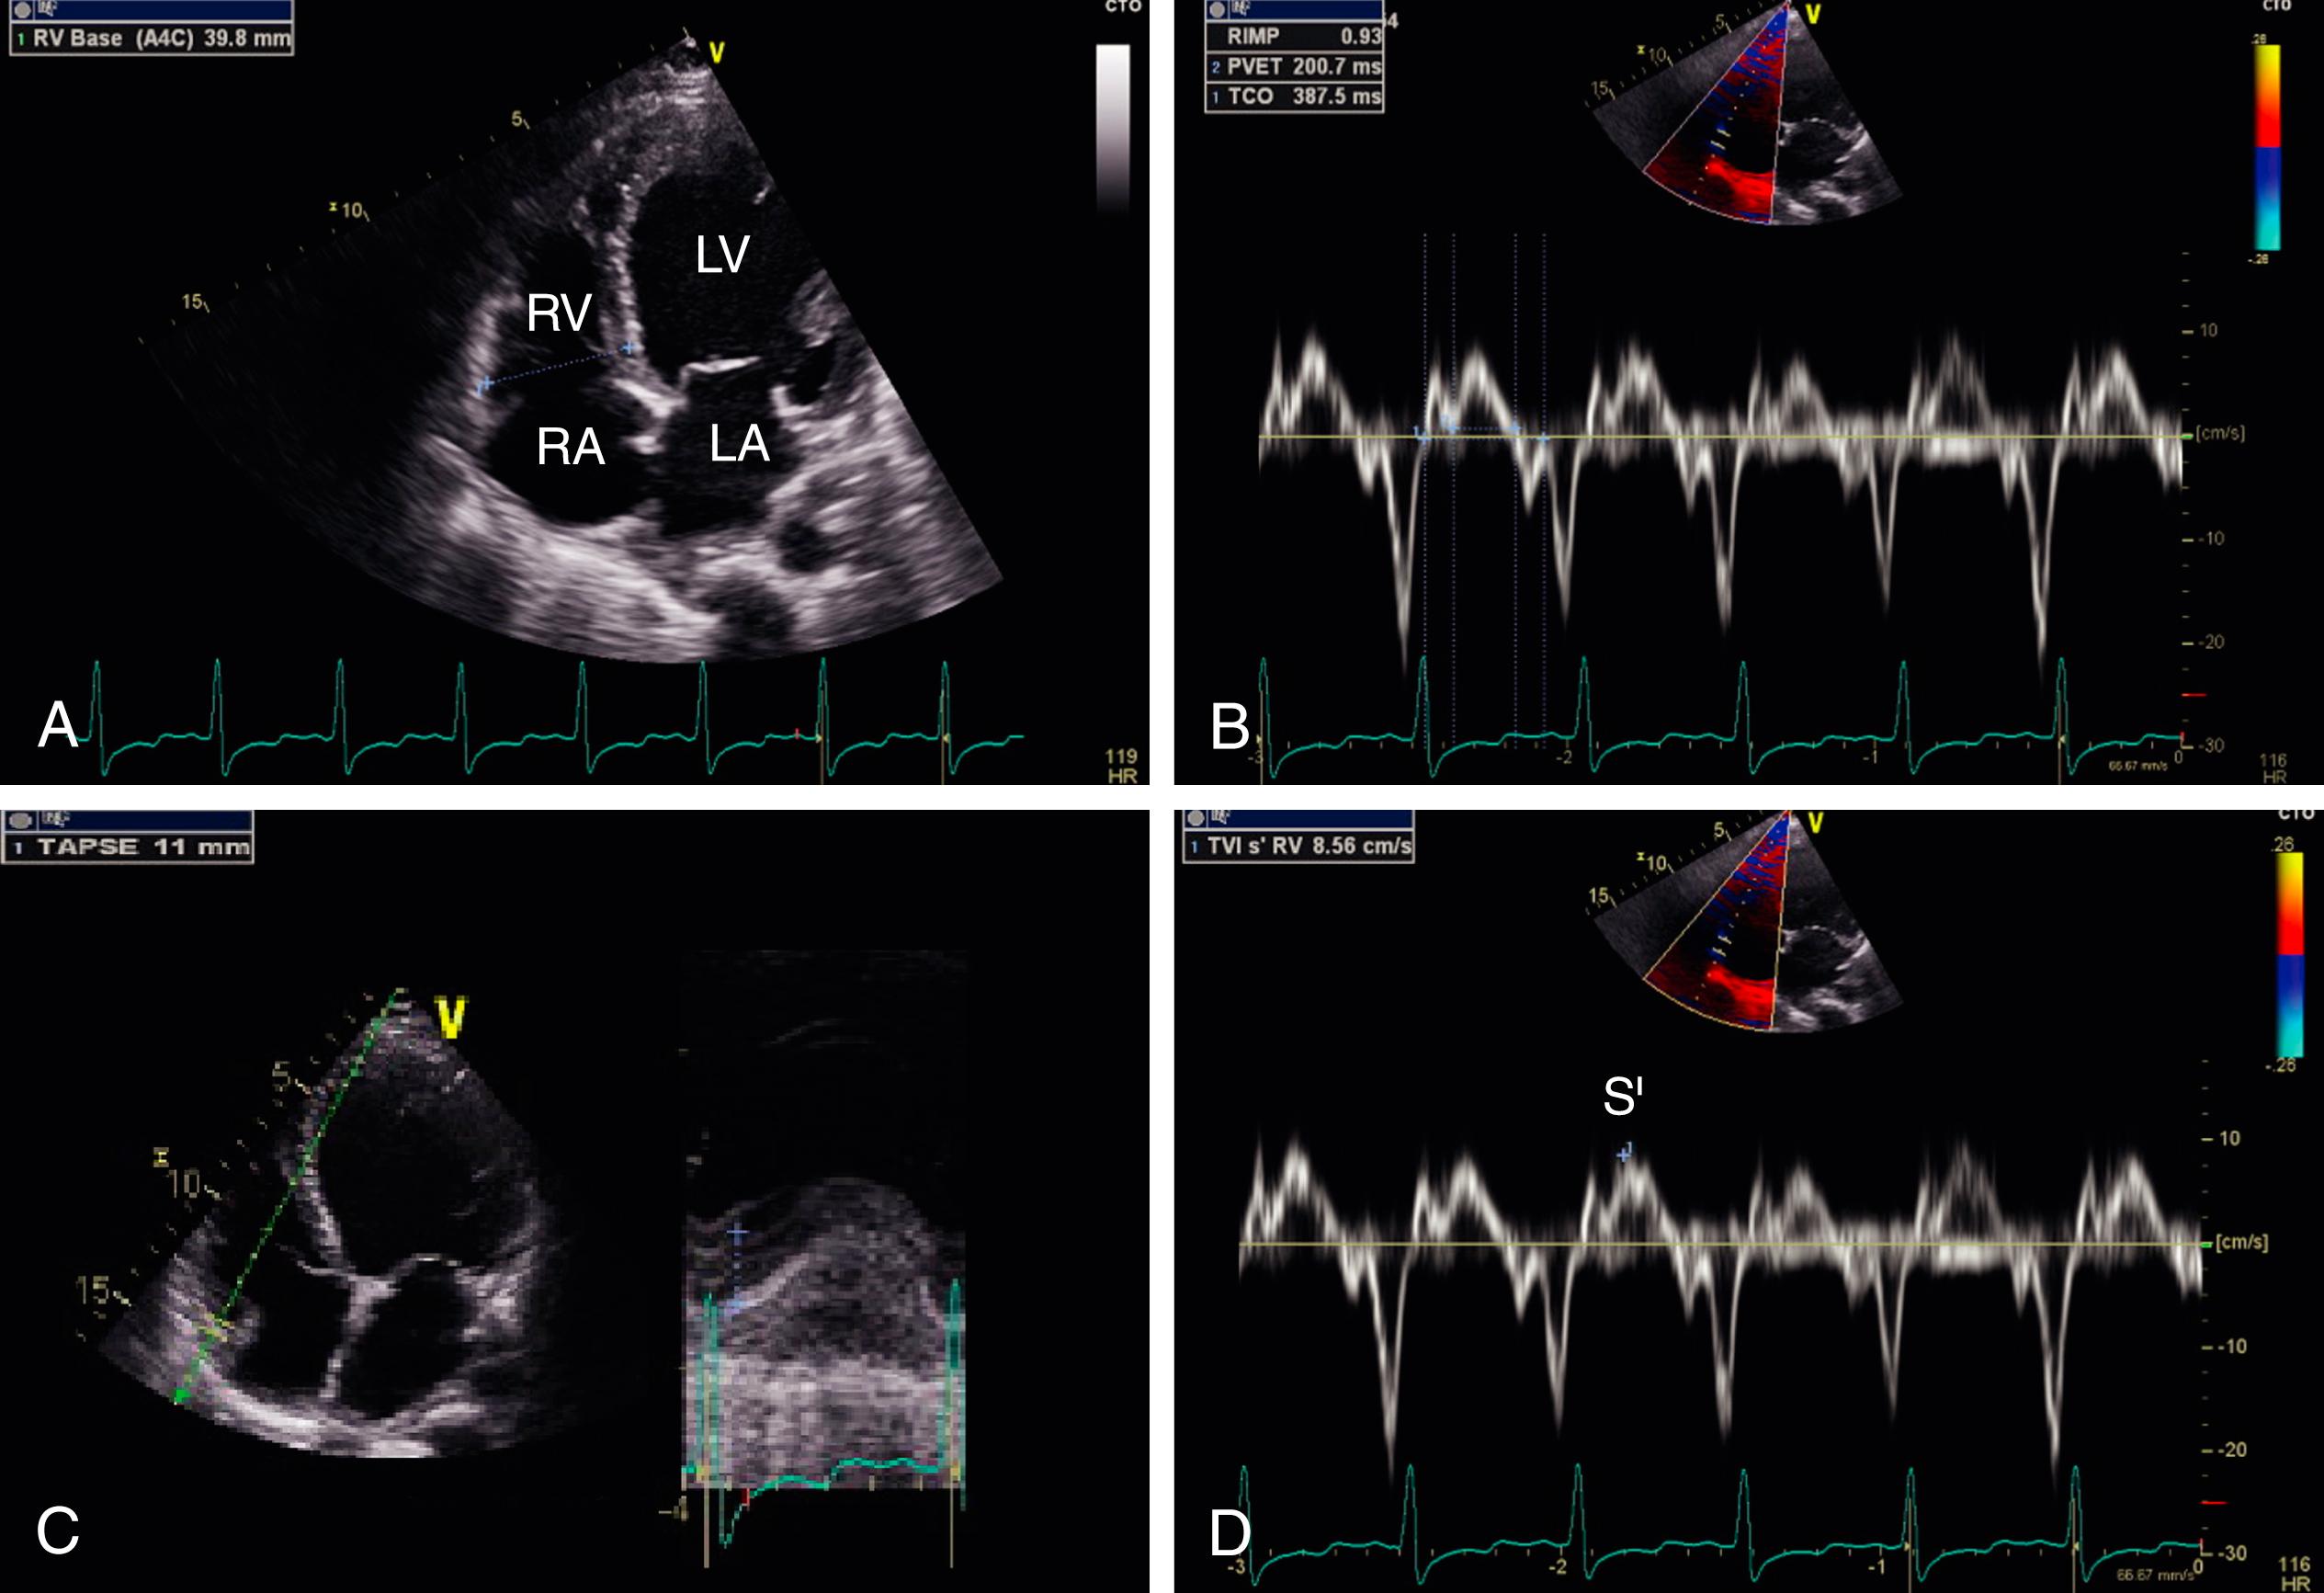 Figure 68.2, Methods to quantify right ventricular (RV) function in a patient with nonischemic dilated cardiomyopathy and biventricular dysfunction. A, Apical four-chamber view showing a basal RV dimension measurement. B, Tissue Doppler–derived RV index of myocardial performance. C, Tricuspid annular plane systolic excursion. D, Doppler S′ from pulsed tissue Doppler of the lateral tricuspid annular velocity. LA, Left atrium; LV, left ventricle; RA, right atrium.